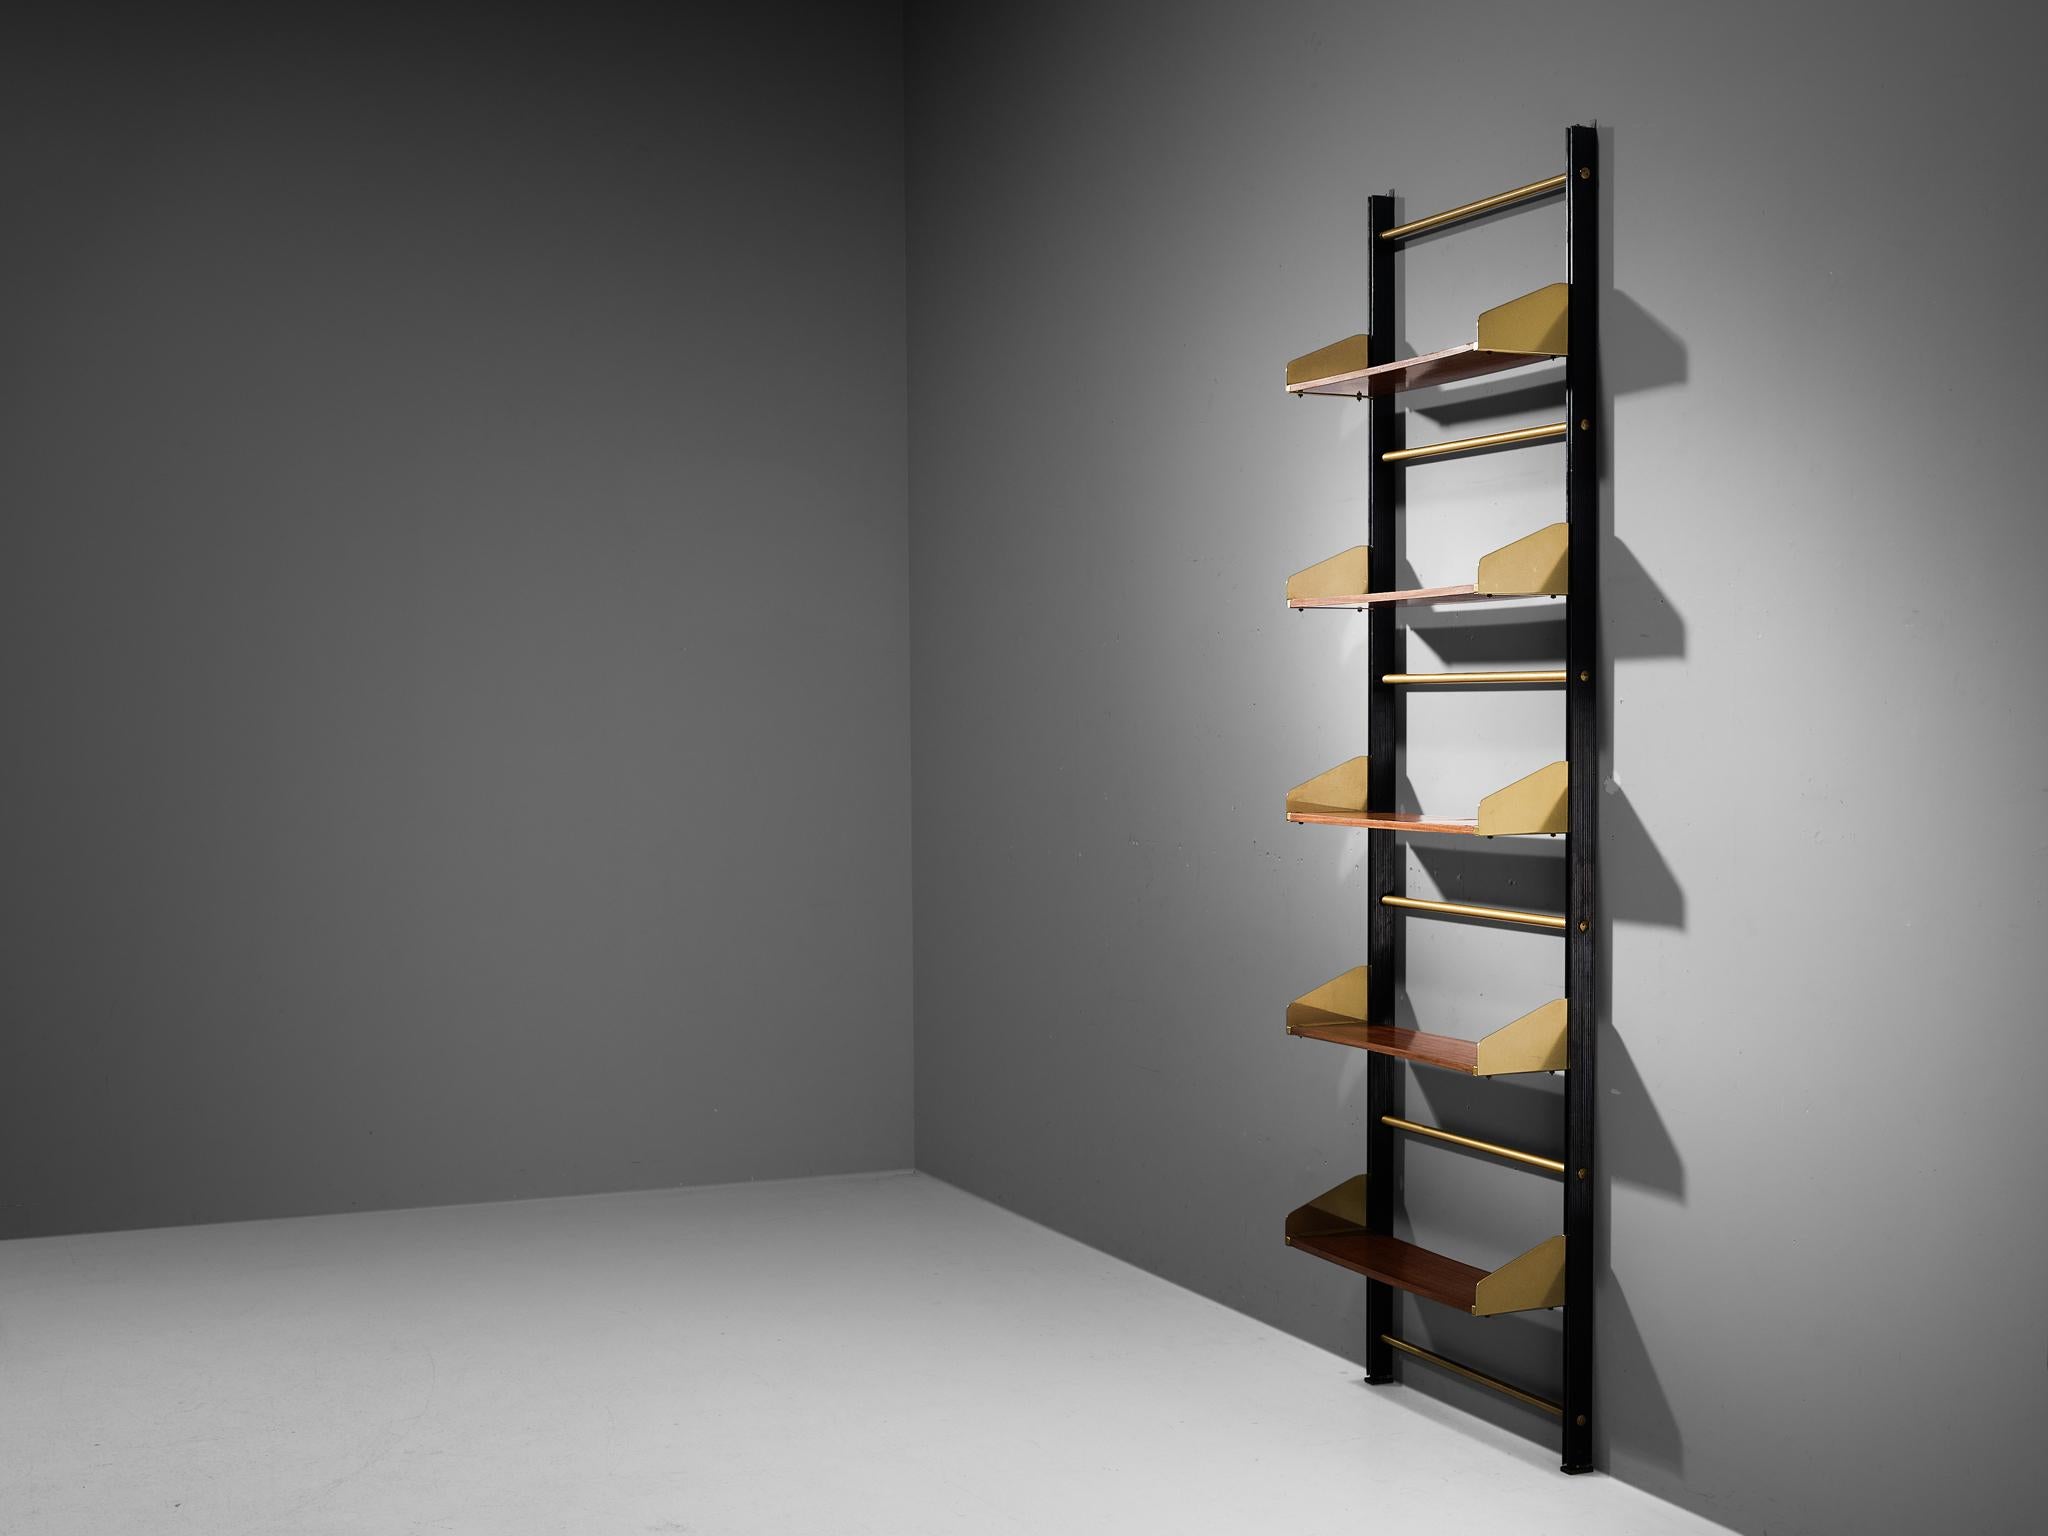 Feal (Fonderie Elettriche Alluminio e Lega), model ‘S2’ wall unit, teak, anodized aluminum, Italy, 1950s 

Both aesthetics and functionality comes into play in this bookcase shelf; elegant in line and practical to use for any environment. This model